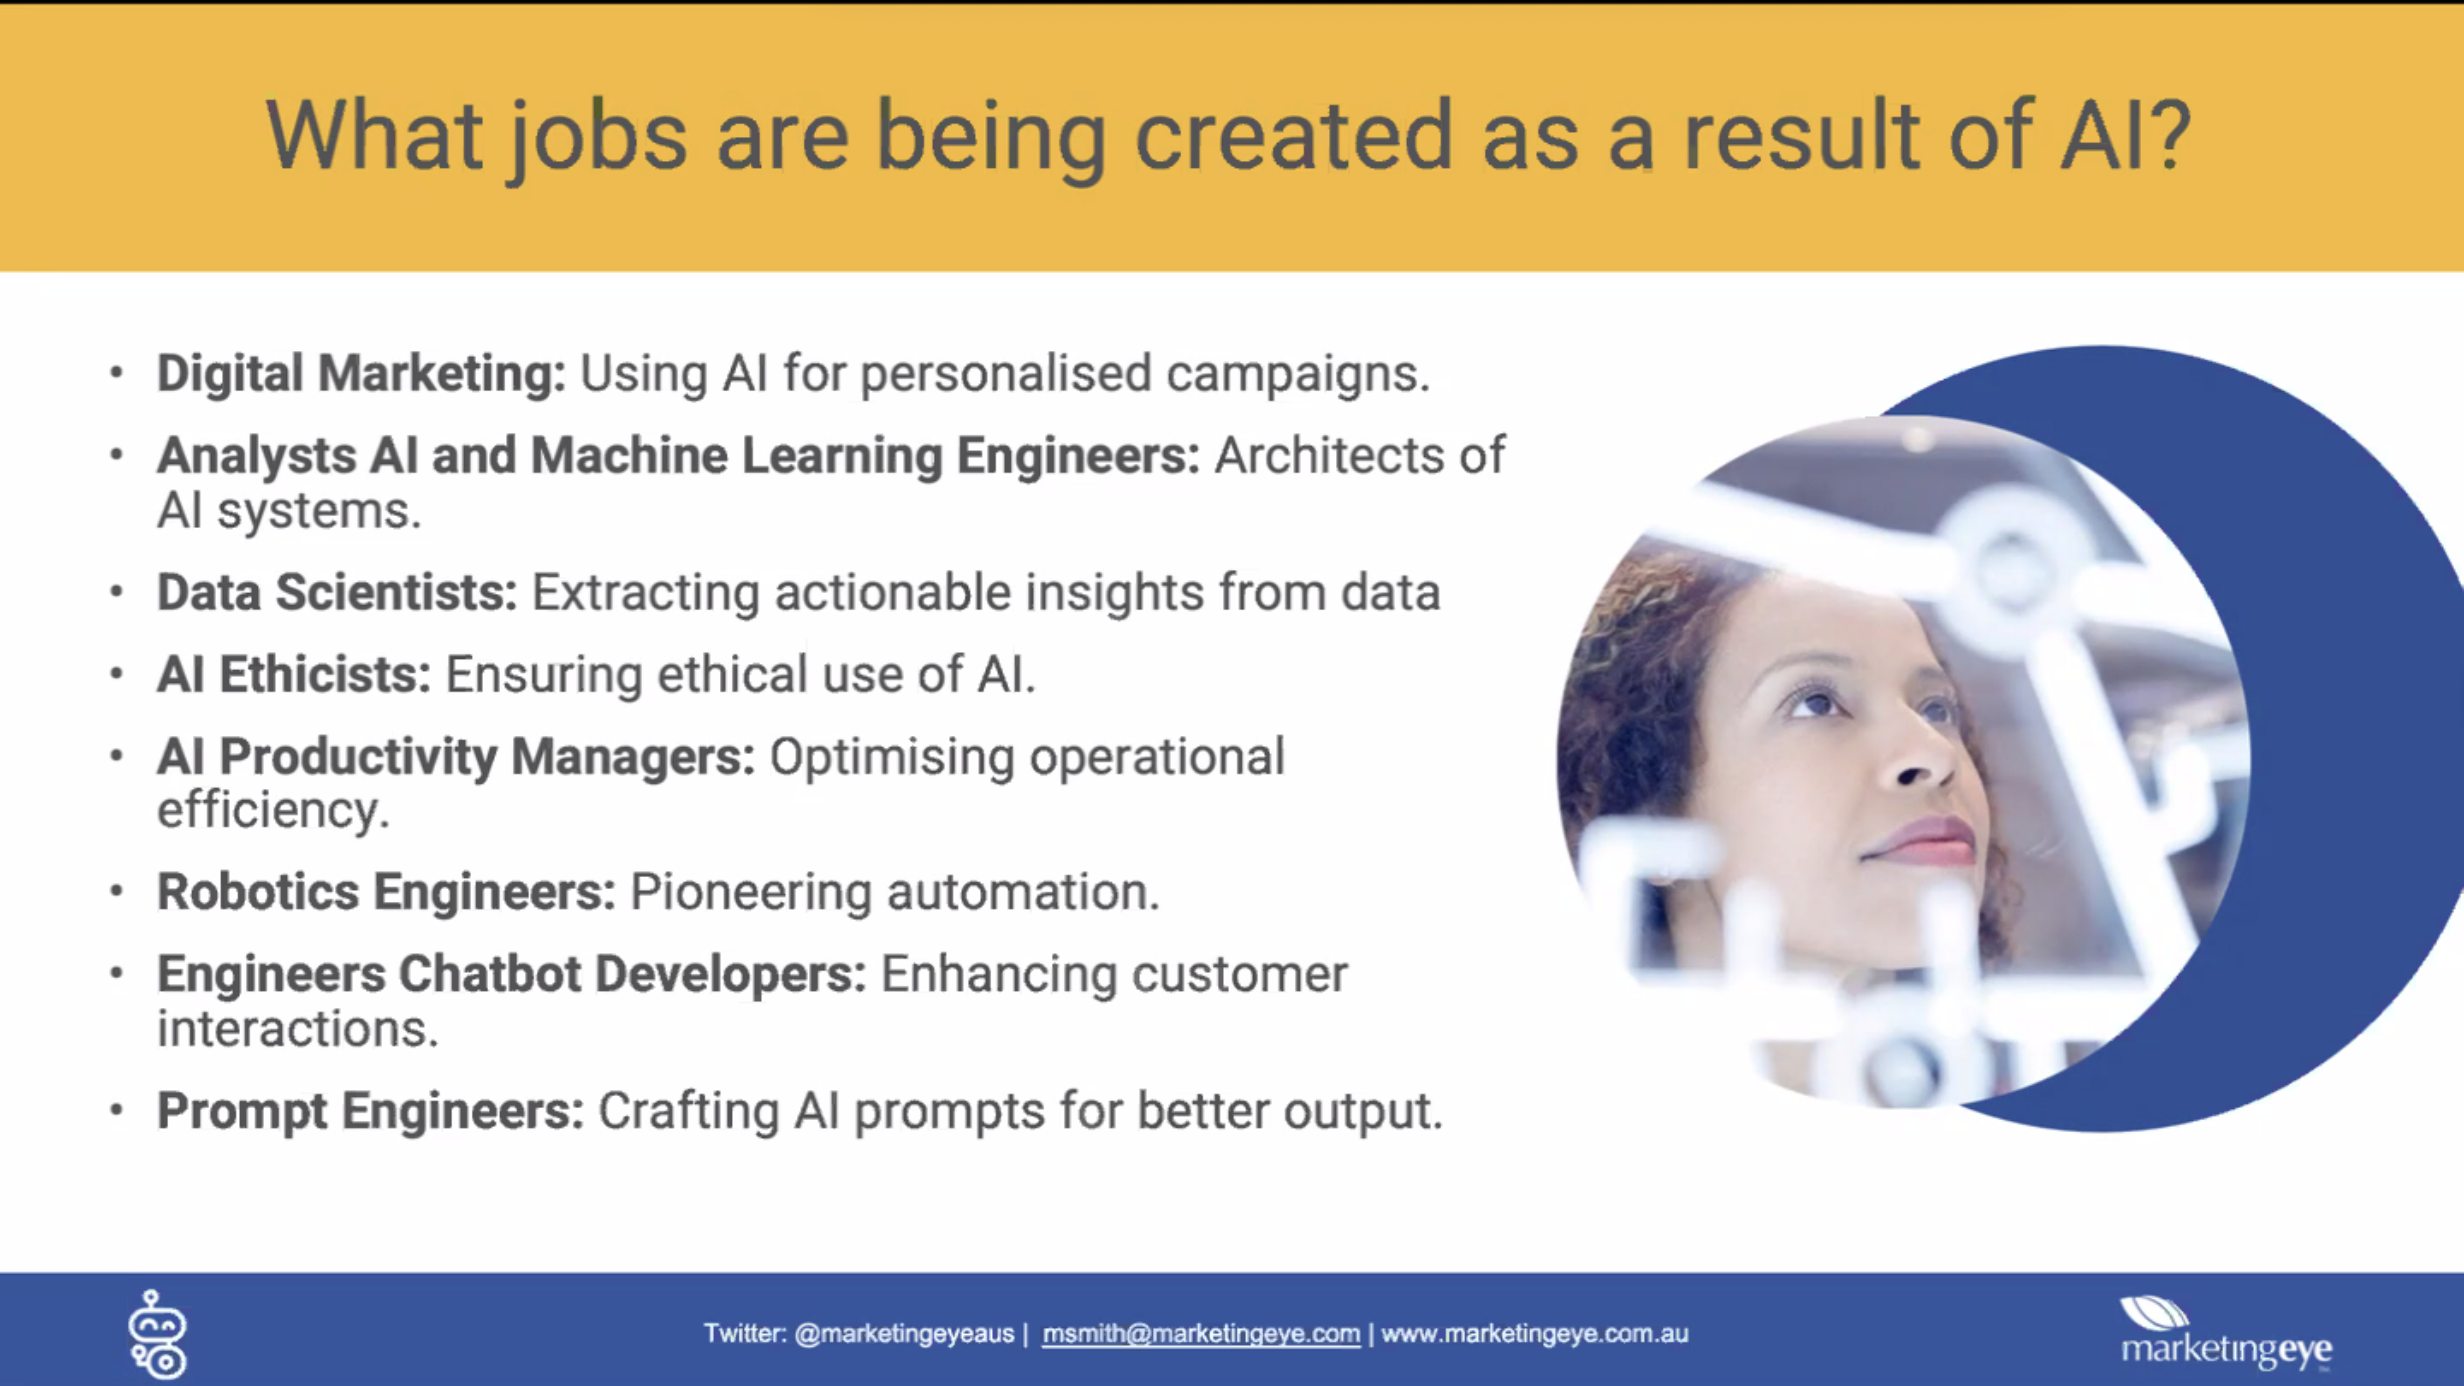 What jobs are being created as a result of AI